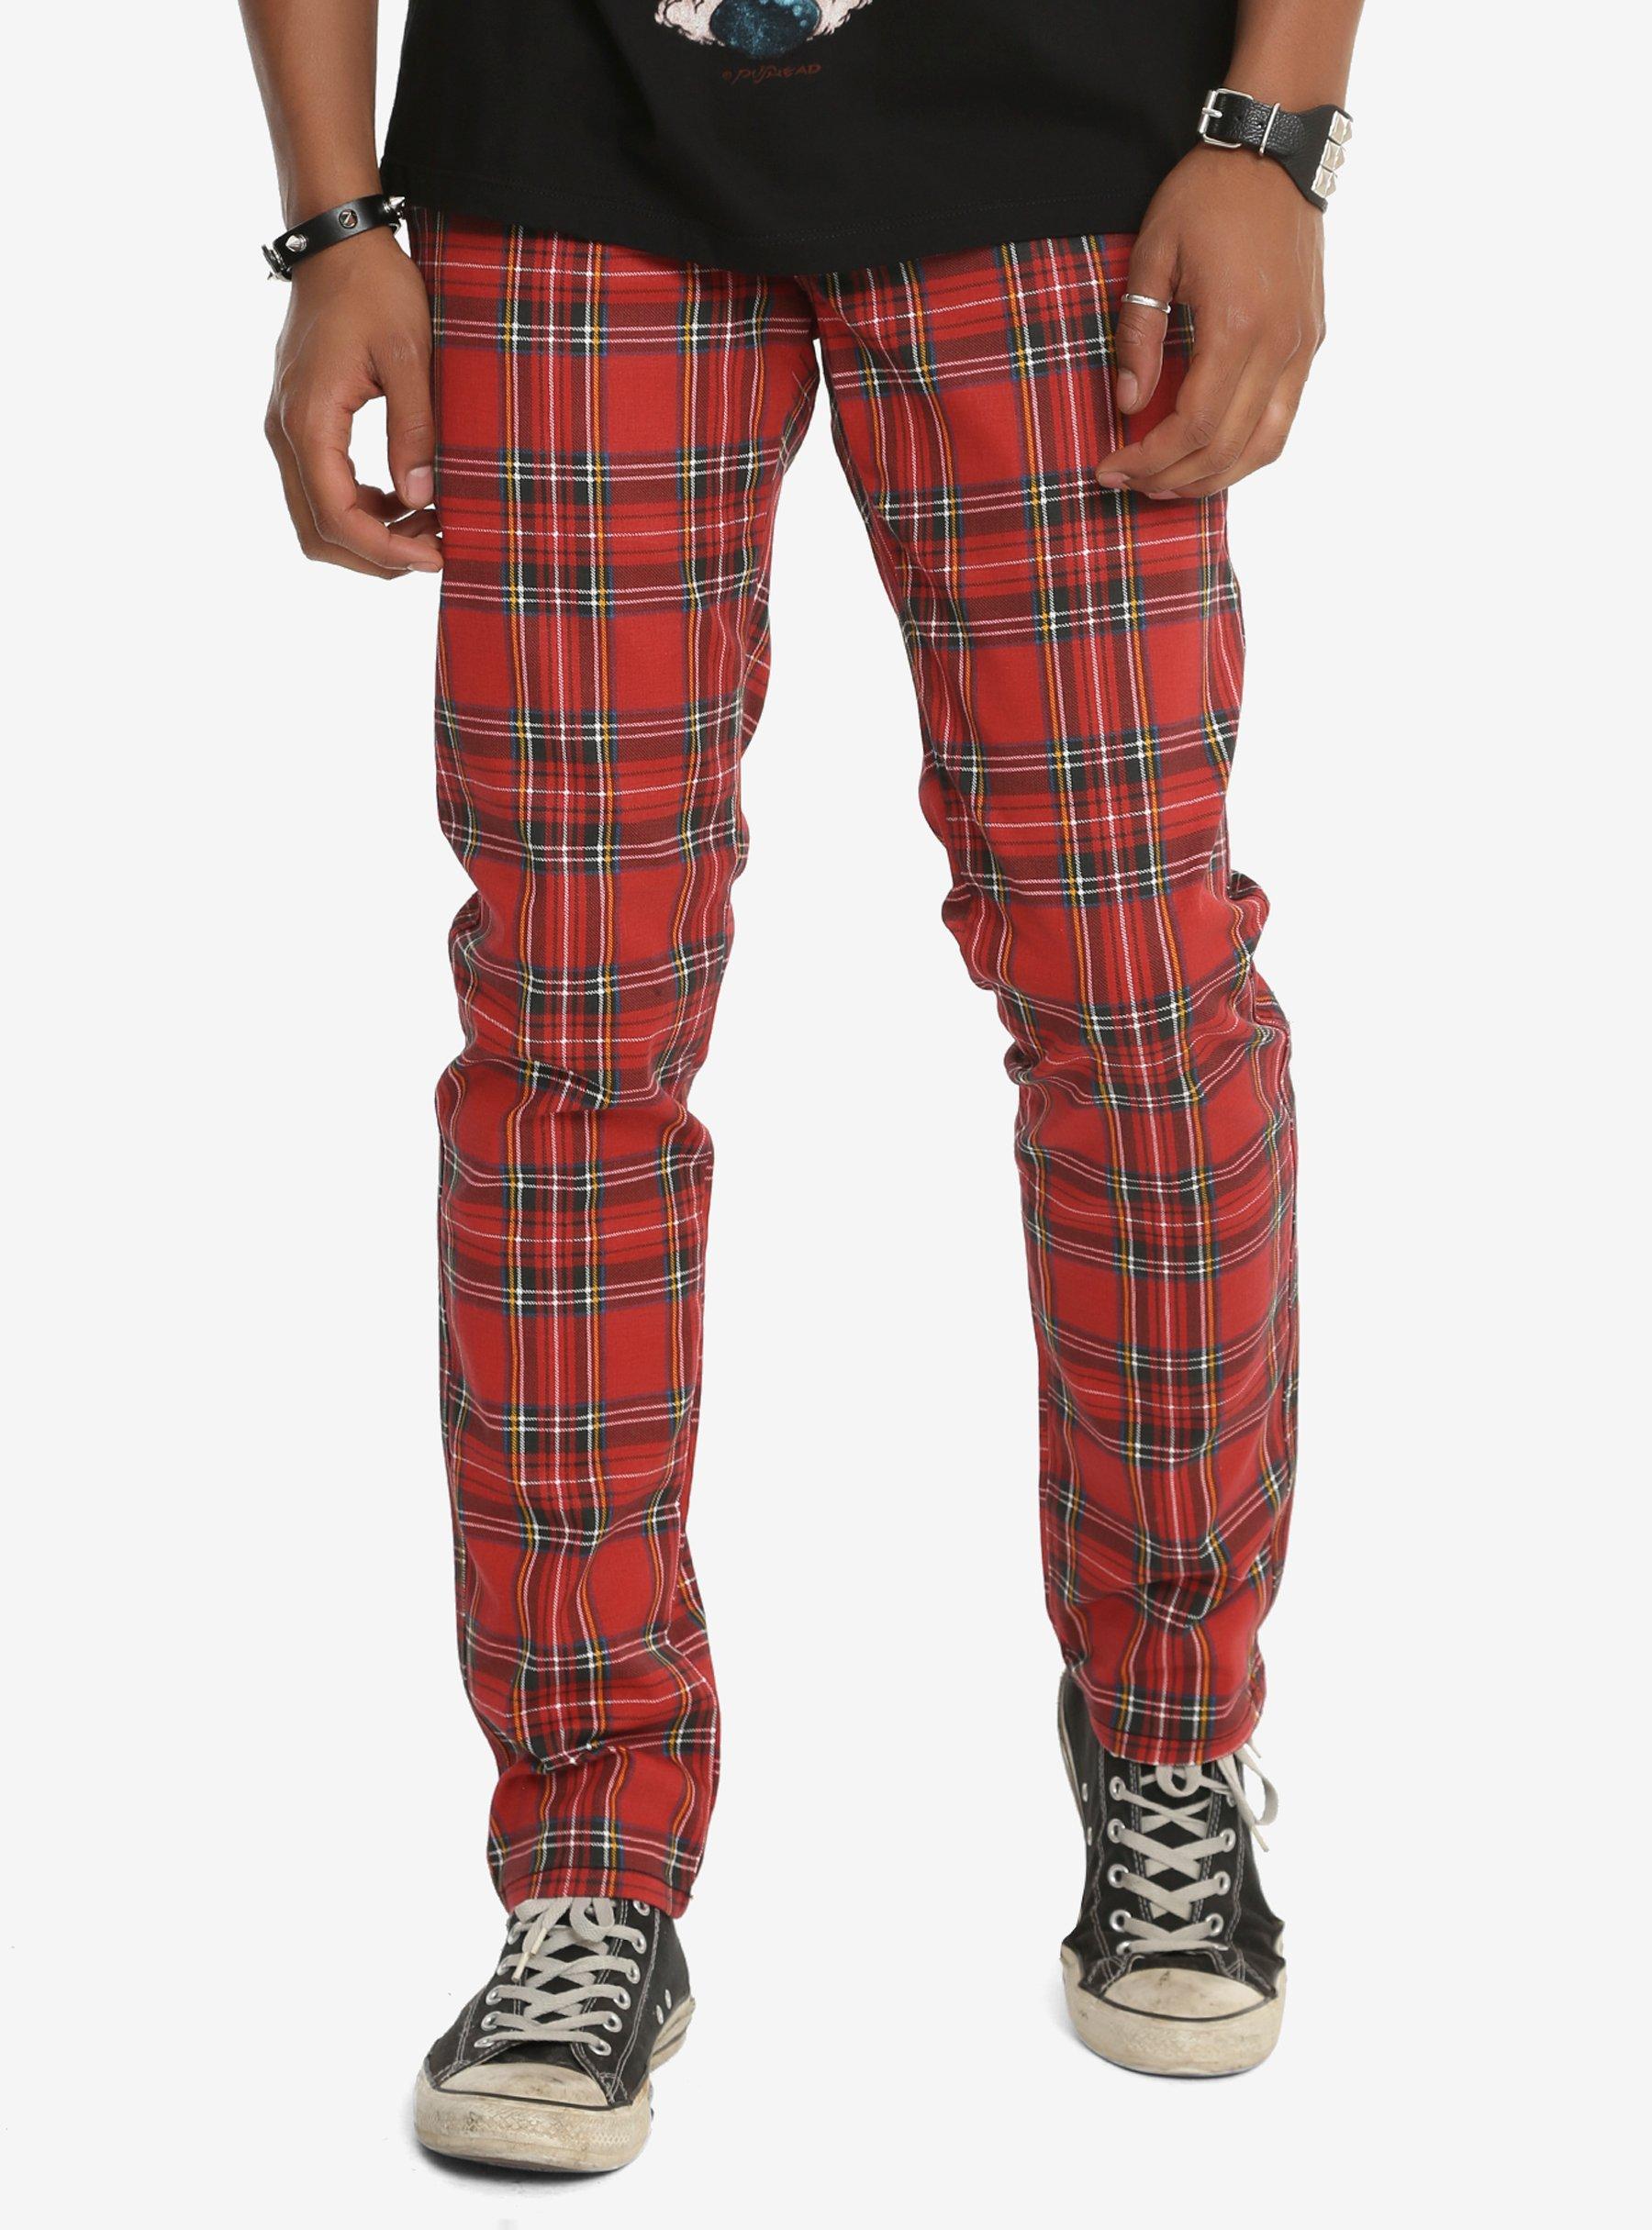 Hot Topic Women's punk red plaid pants with suspenders size 3